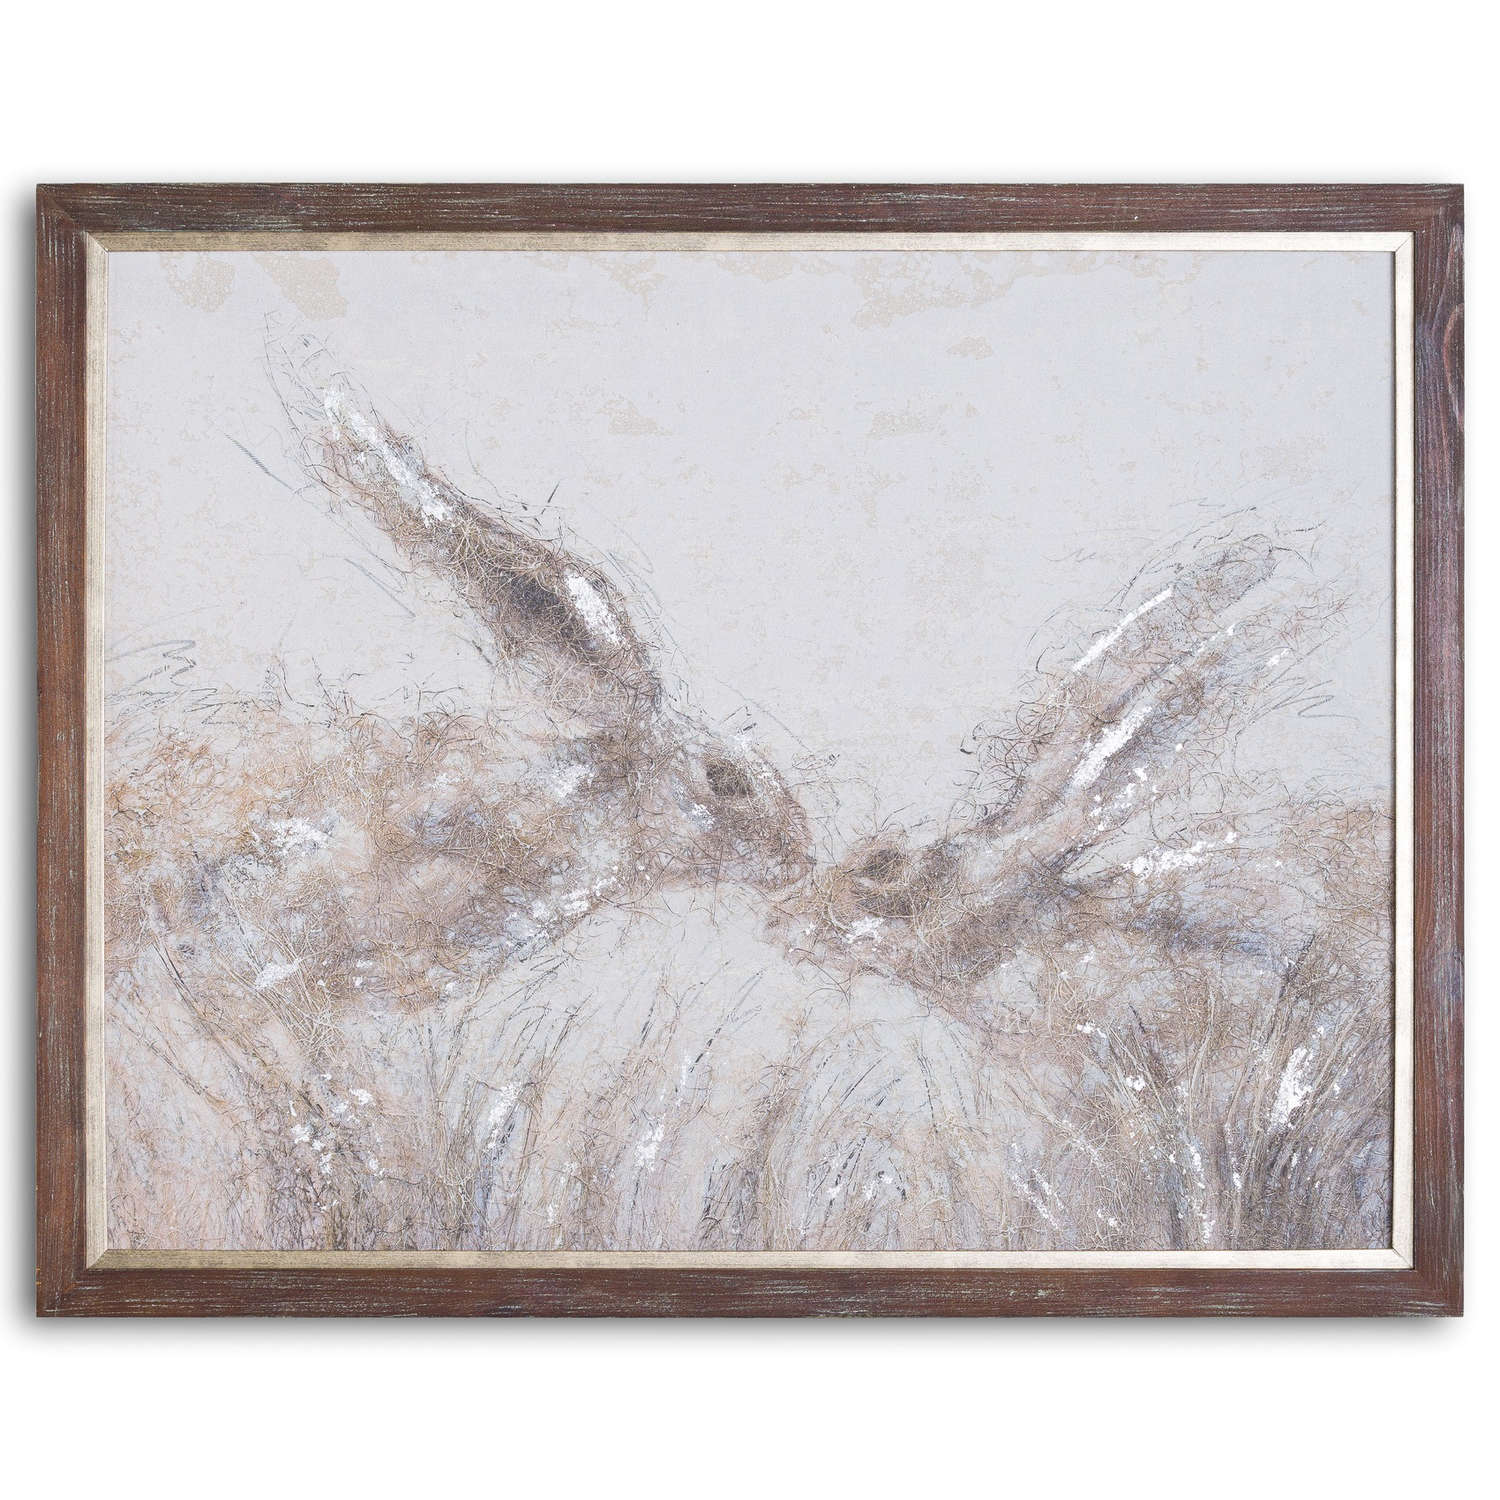 March Hares On Cement Board With Frame - Image 1